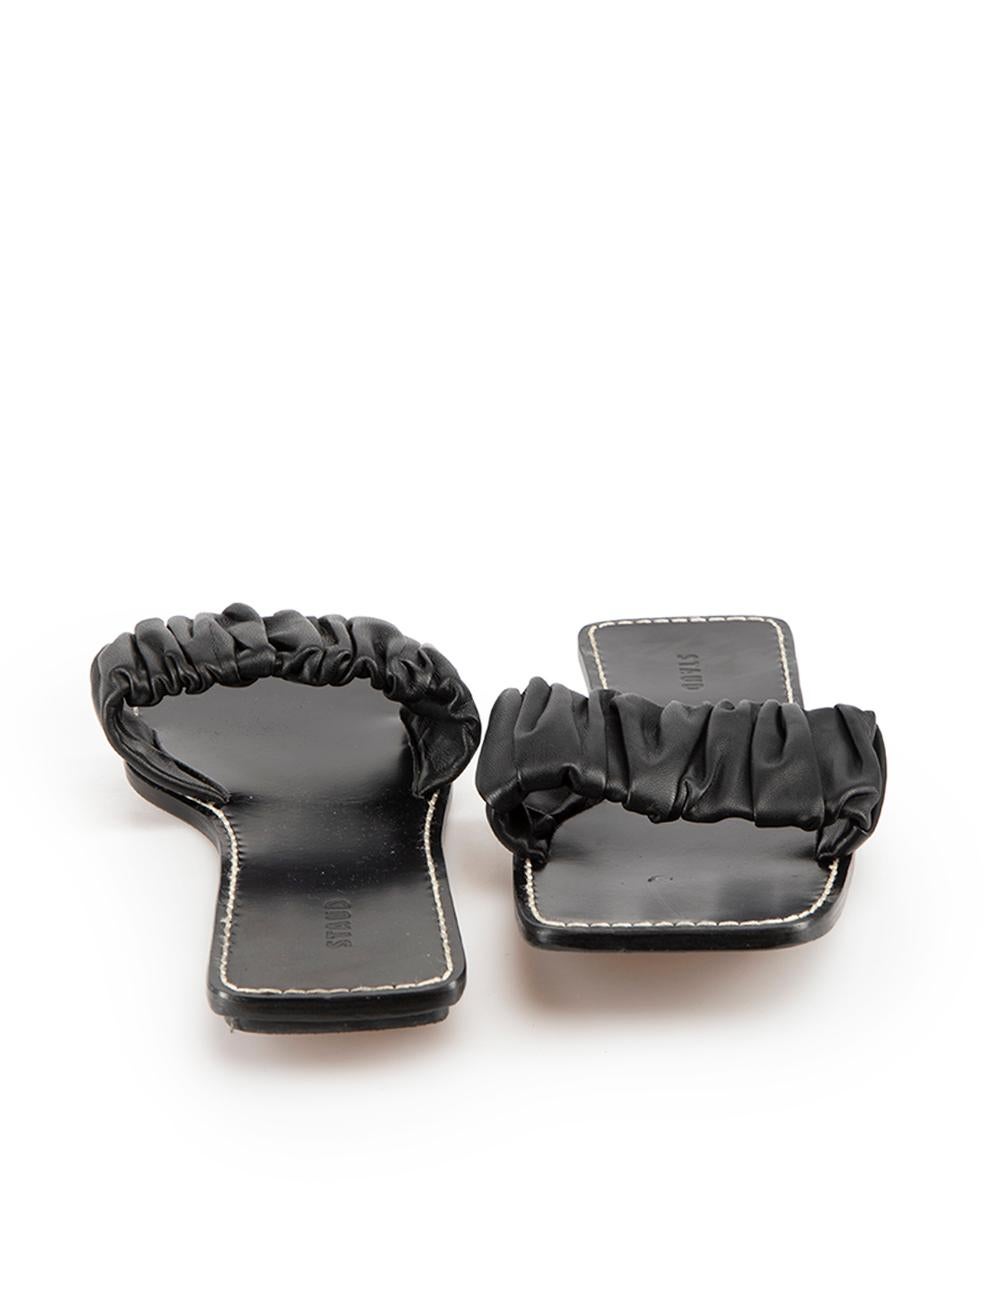 STAUD Black Leather Ruched Slides Size IT 36 In Good Condition For Sale In London, GB